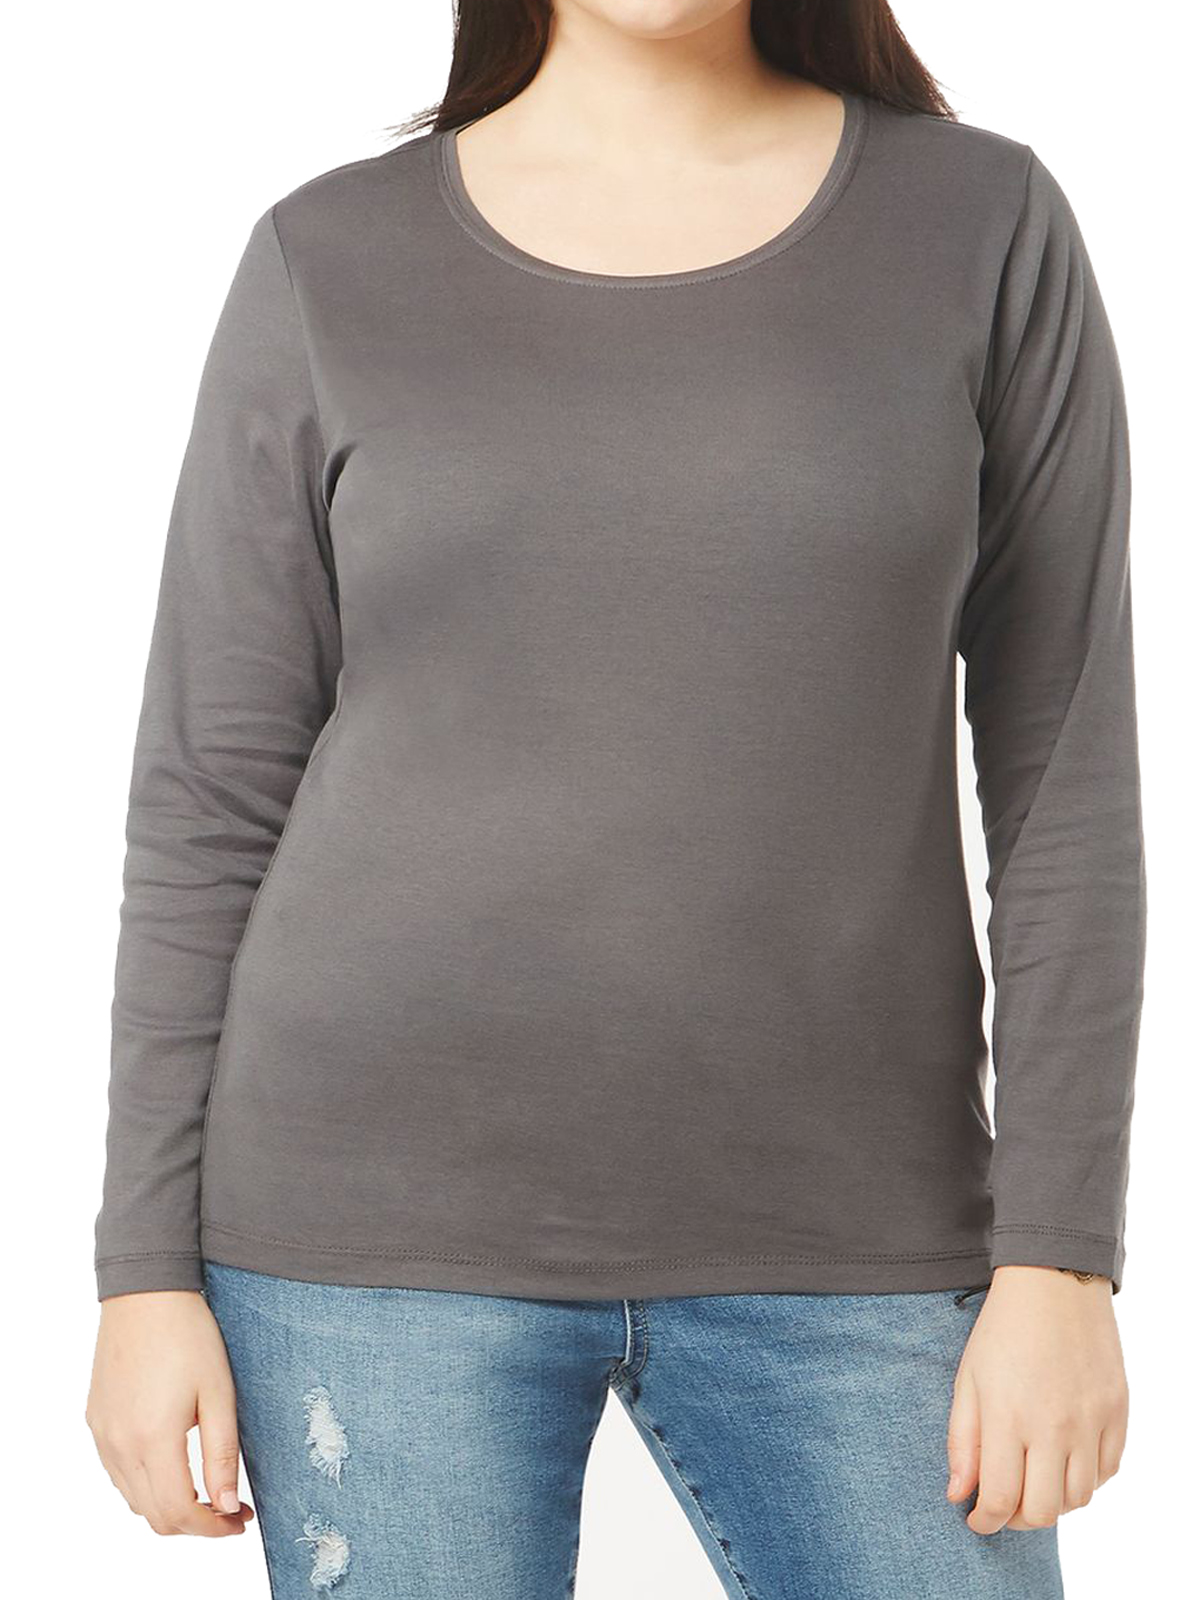 3vans CHARCOAL Pure Cotton Long Sleeve Top - Plus Size 16 to 22/24